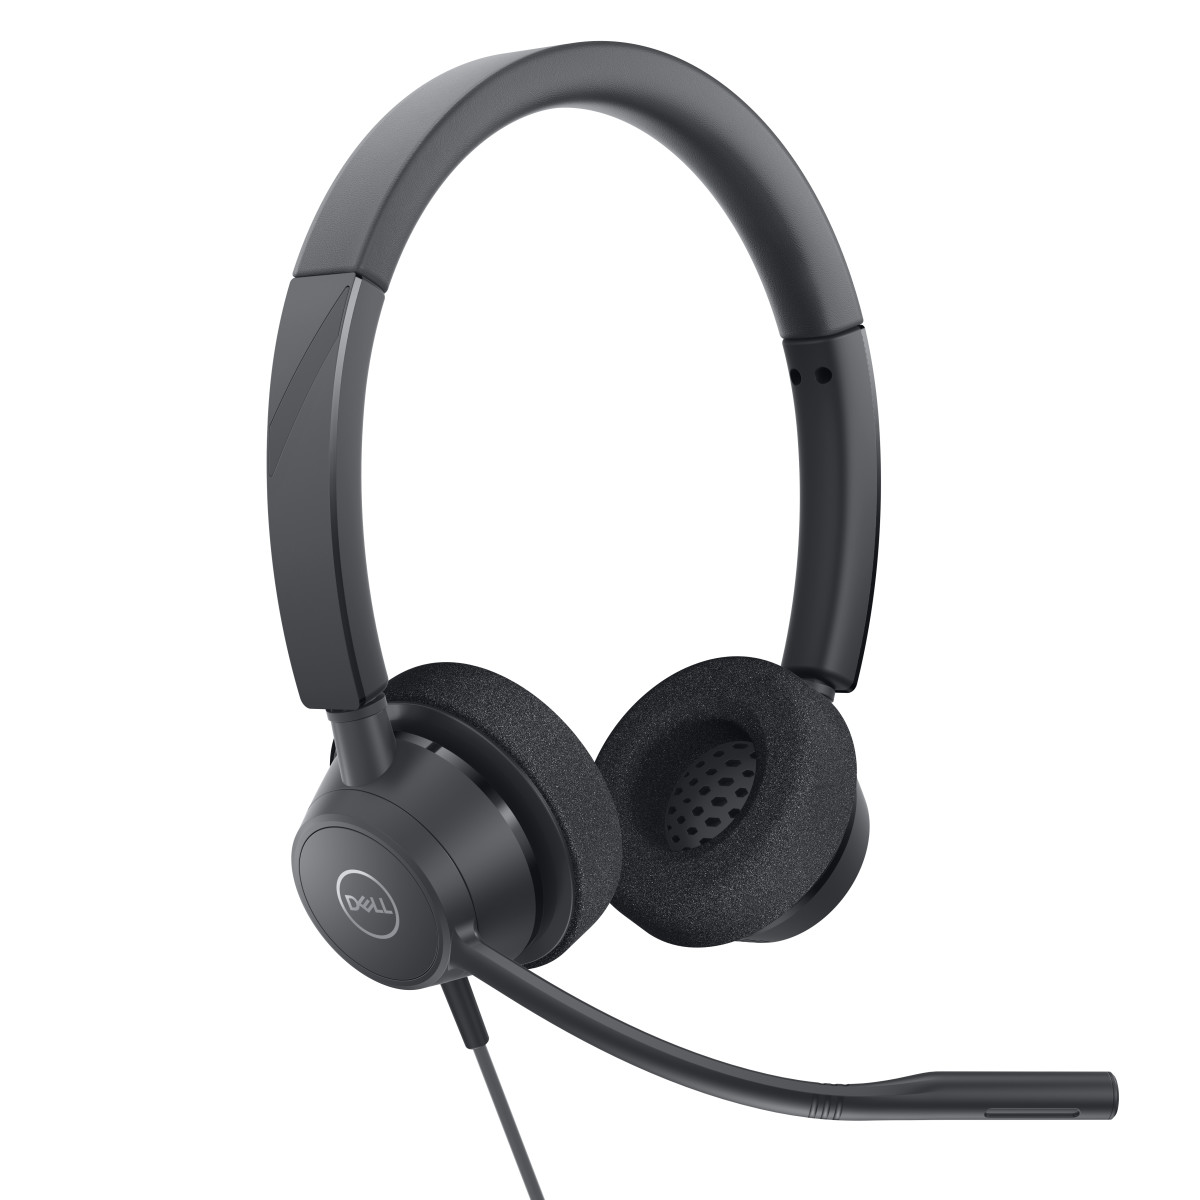 Pro Stereo Headset WH3022